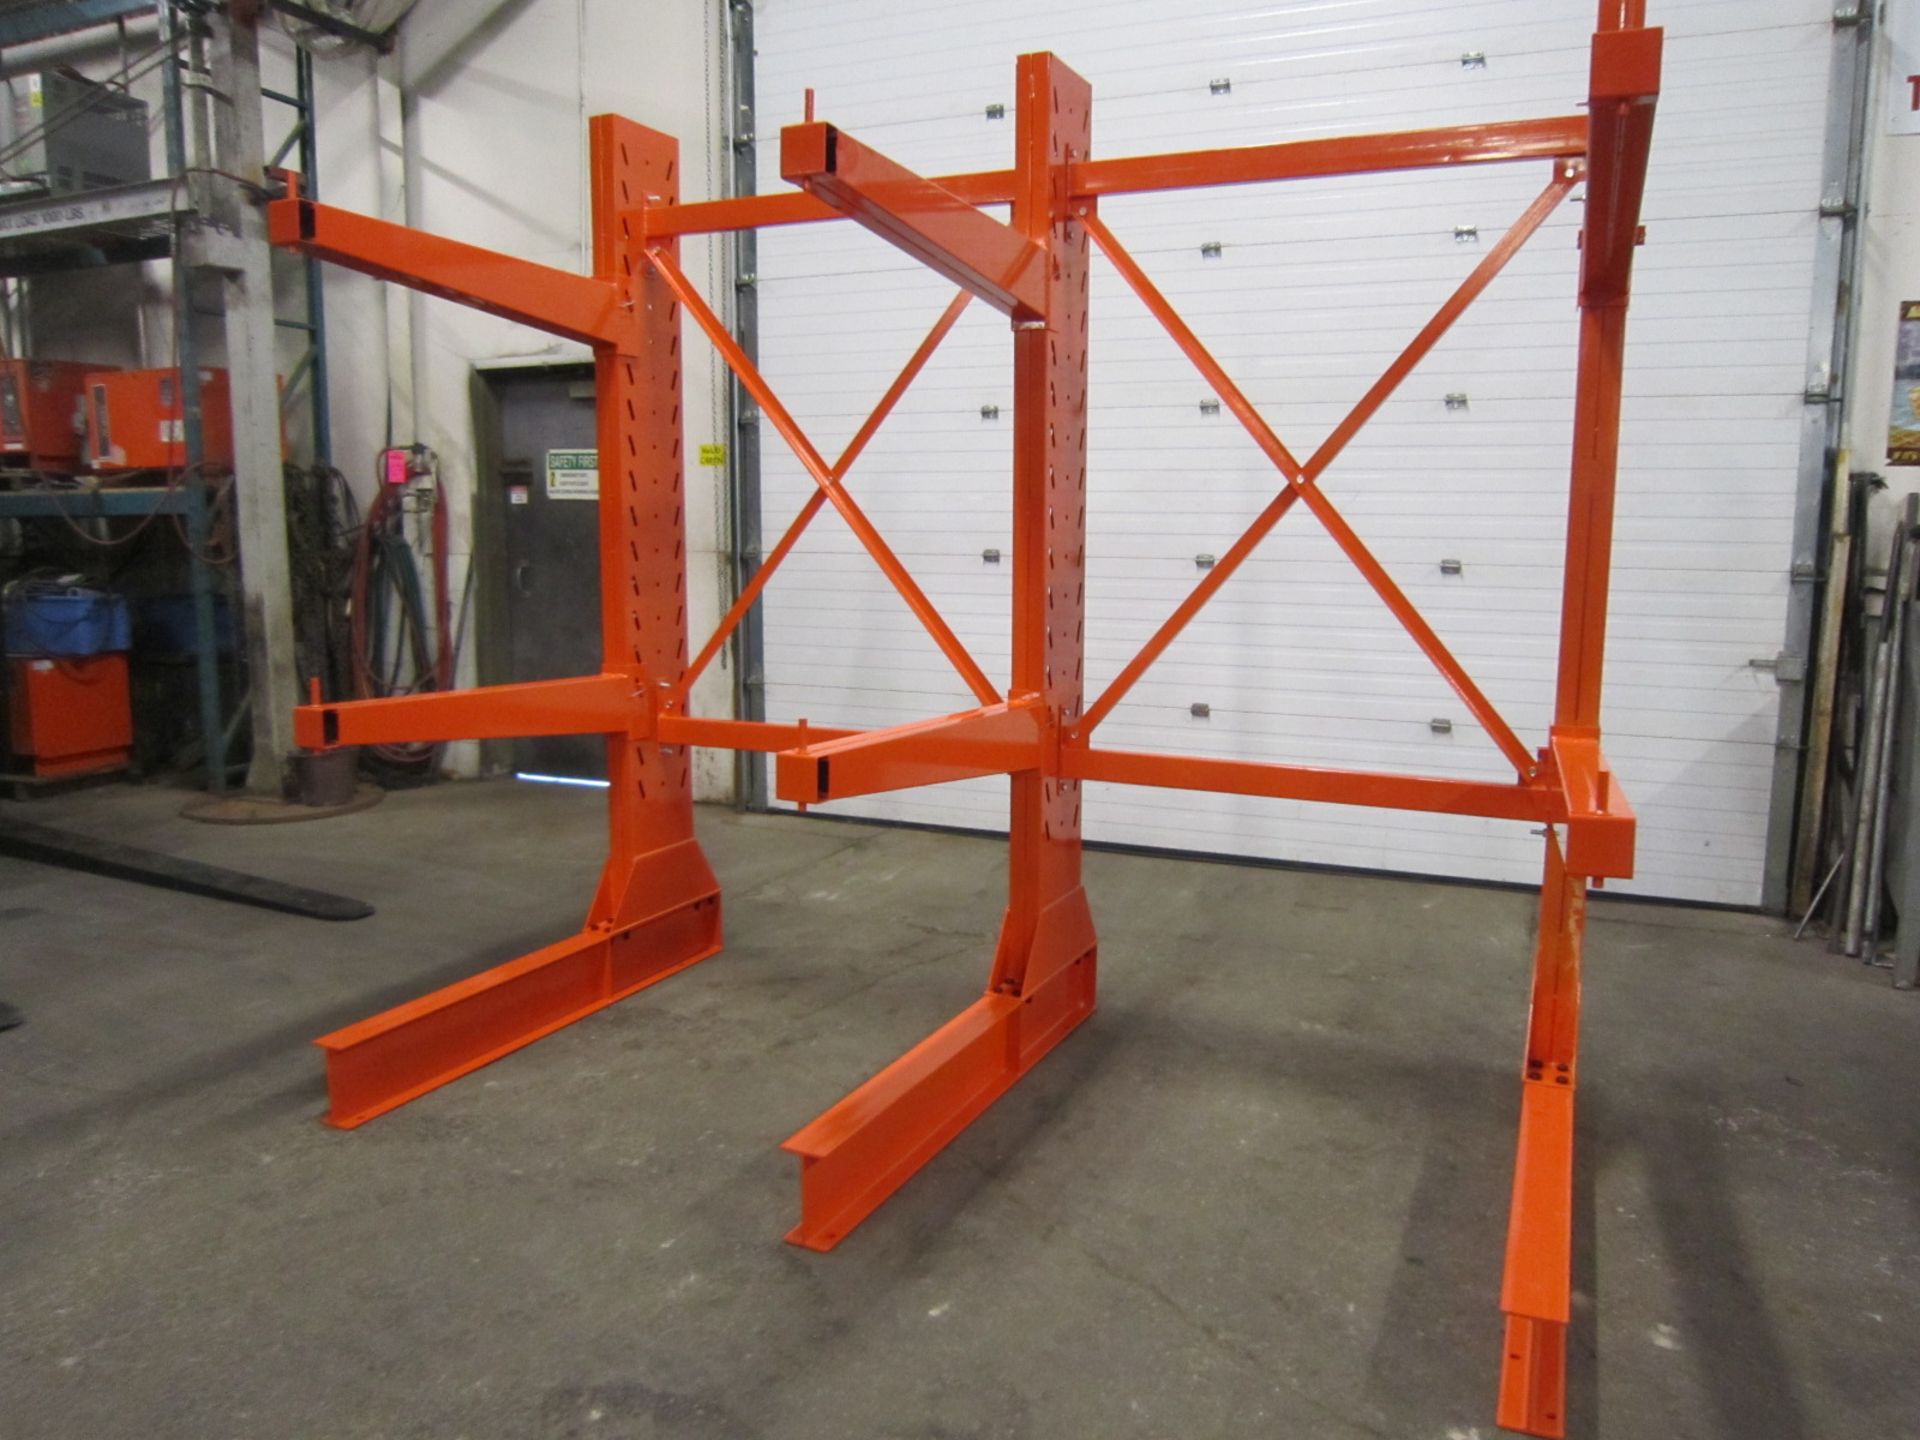 Lot of Heavy Duty Cantilever Racking - 3 full sections complete with SIX 4' arms - 100" tall units